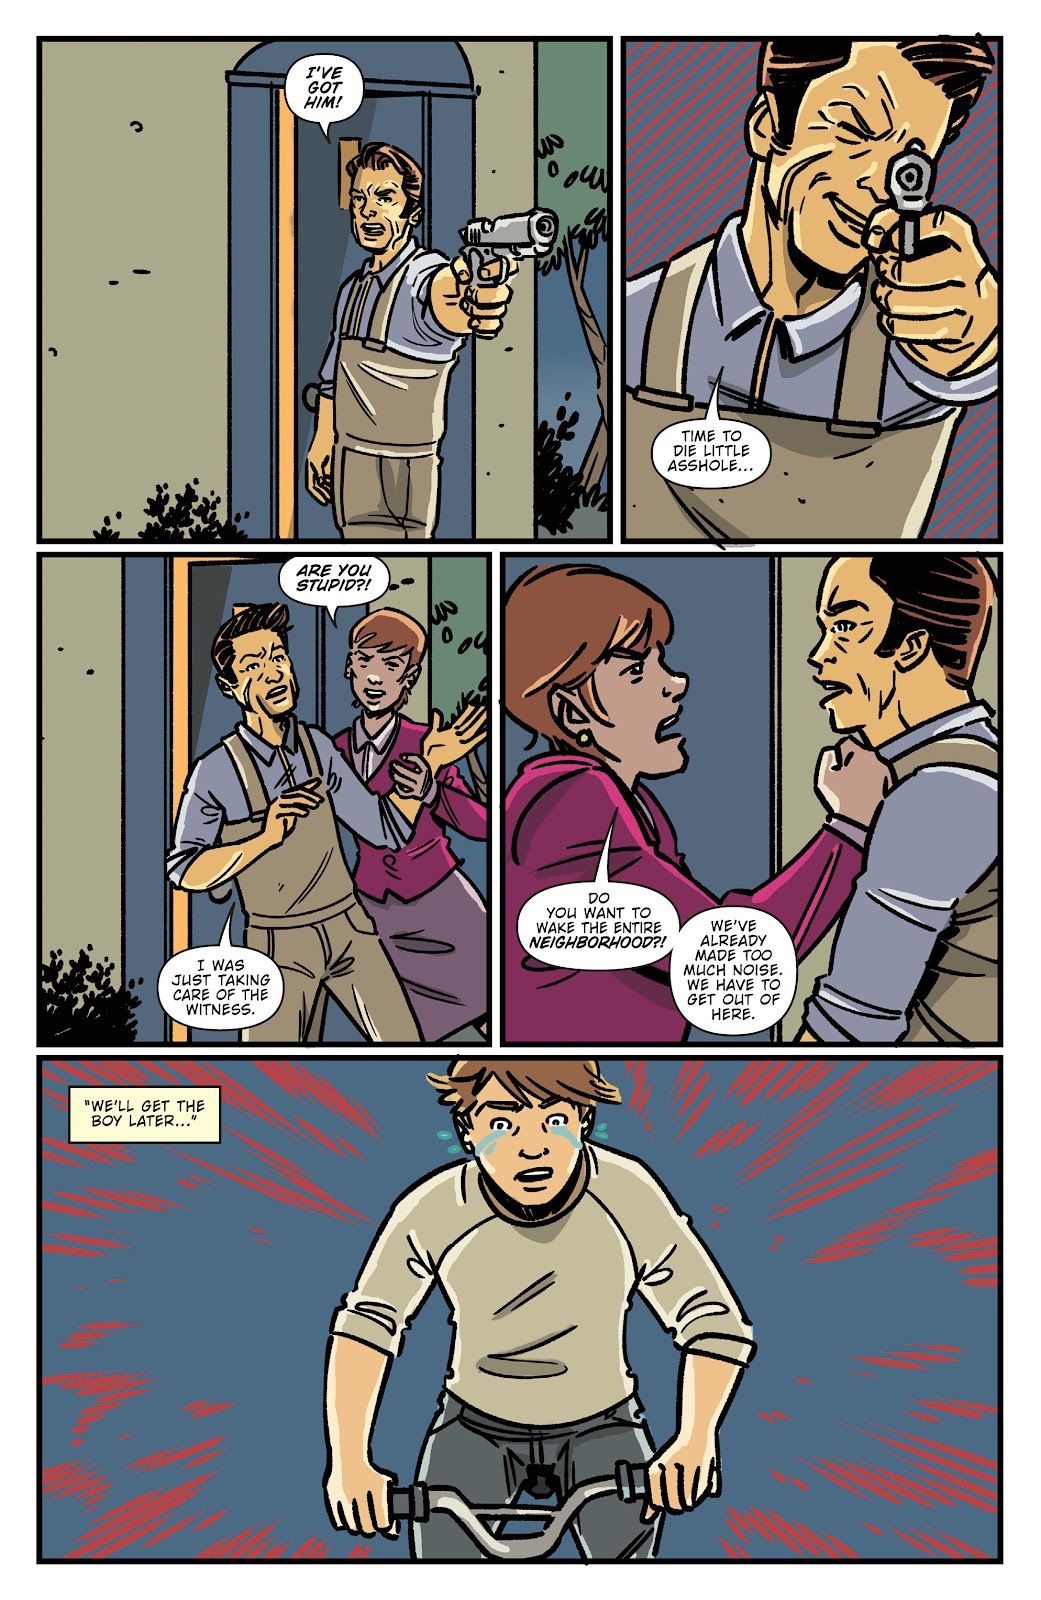 Cult Classic: Return to Whisper issue 2 & 3 - Page 44